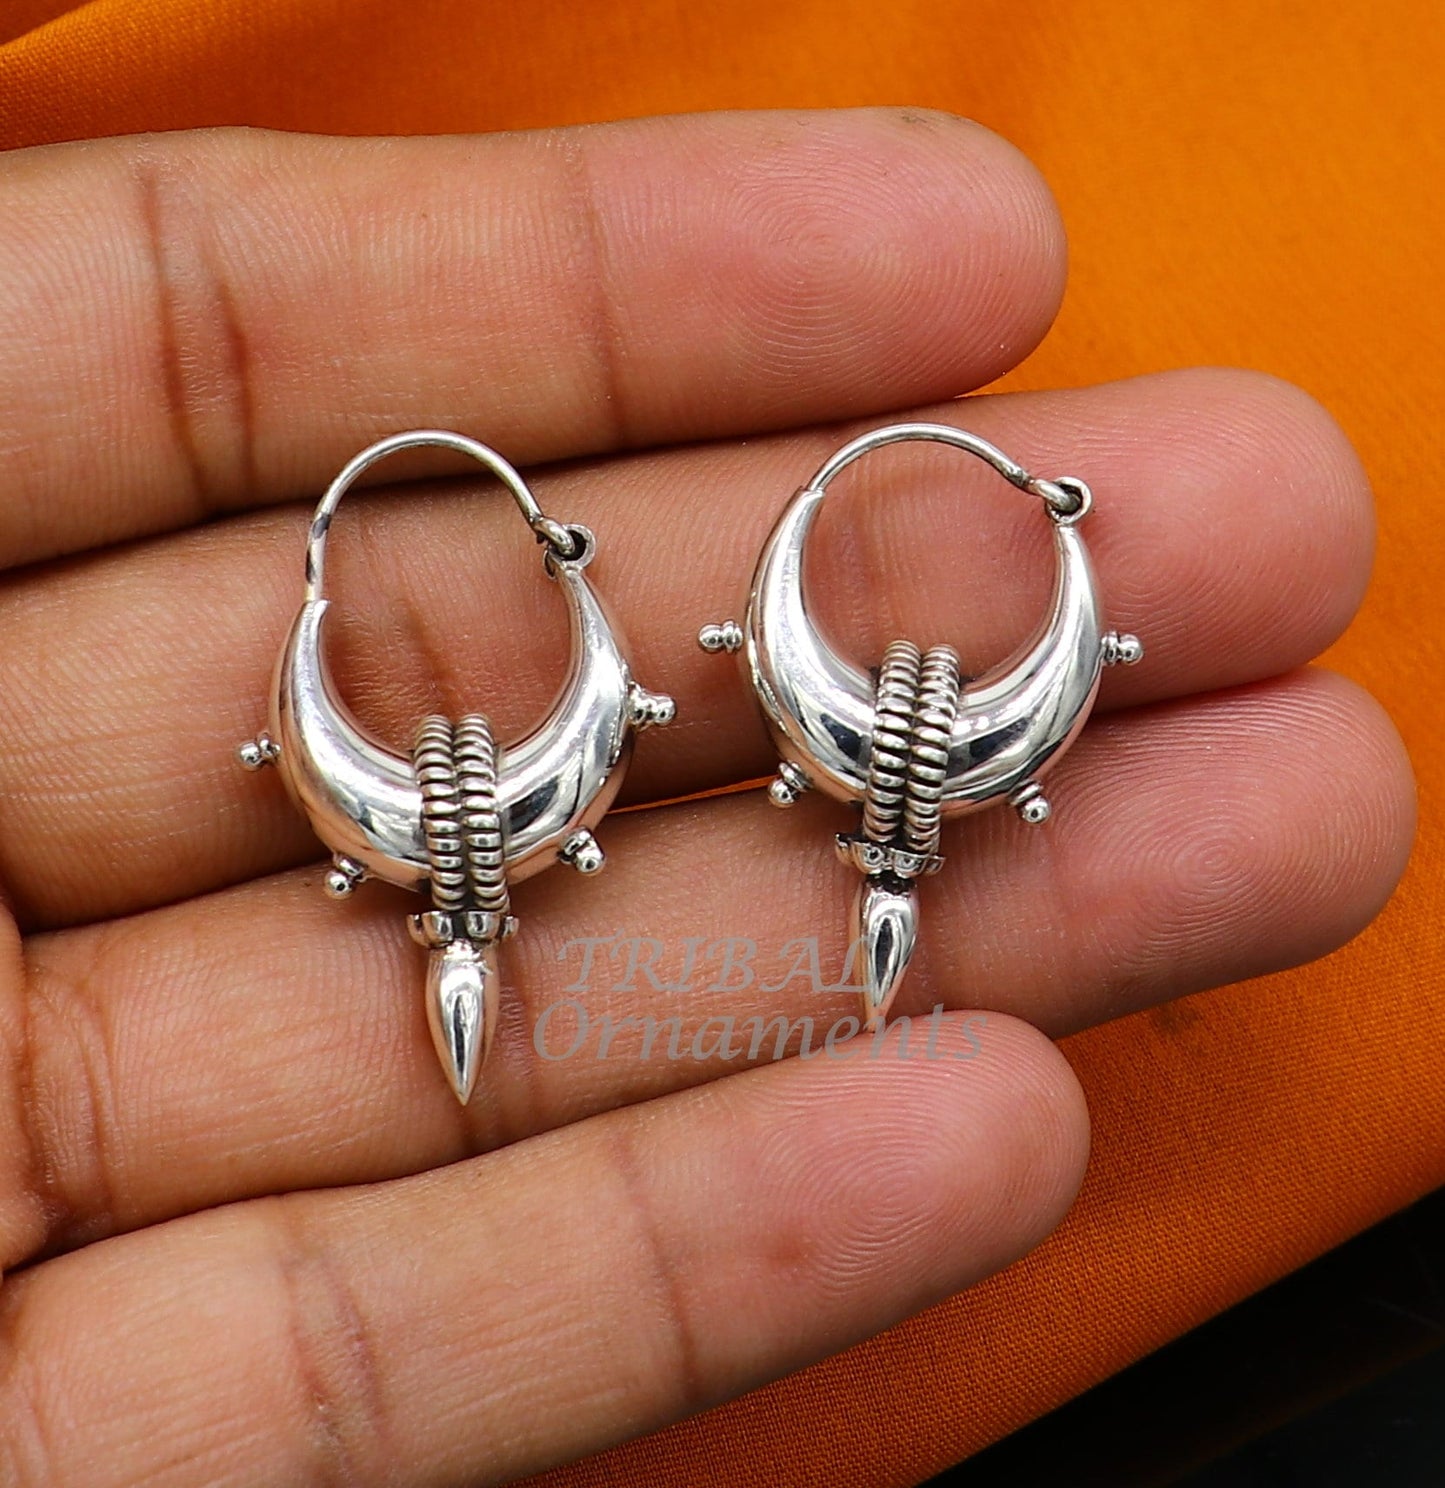 925 sterling silver handmade unique traditional cultural ethnic hoops earring bali for men's or girl's best dancing jewelry s1123 - TRIBAL ORNAMENTS